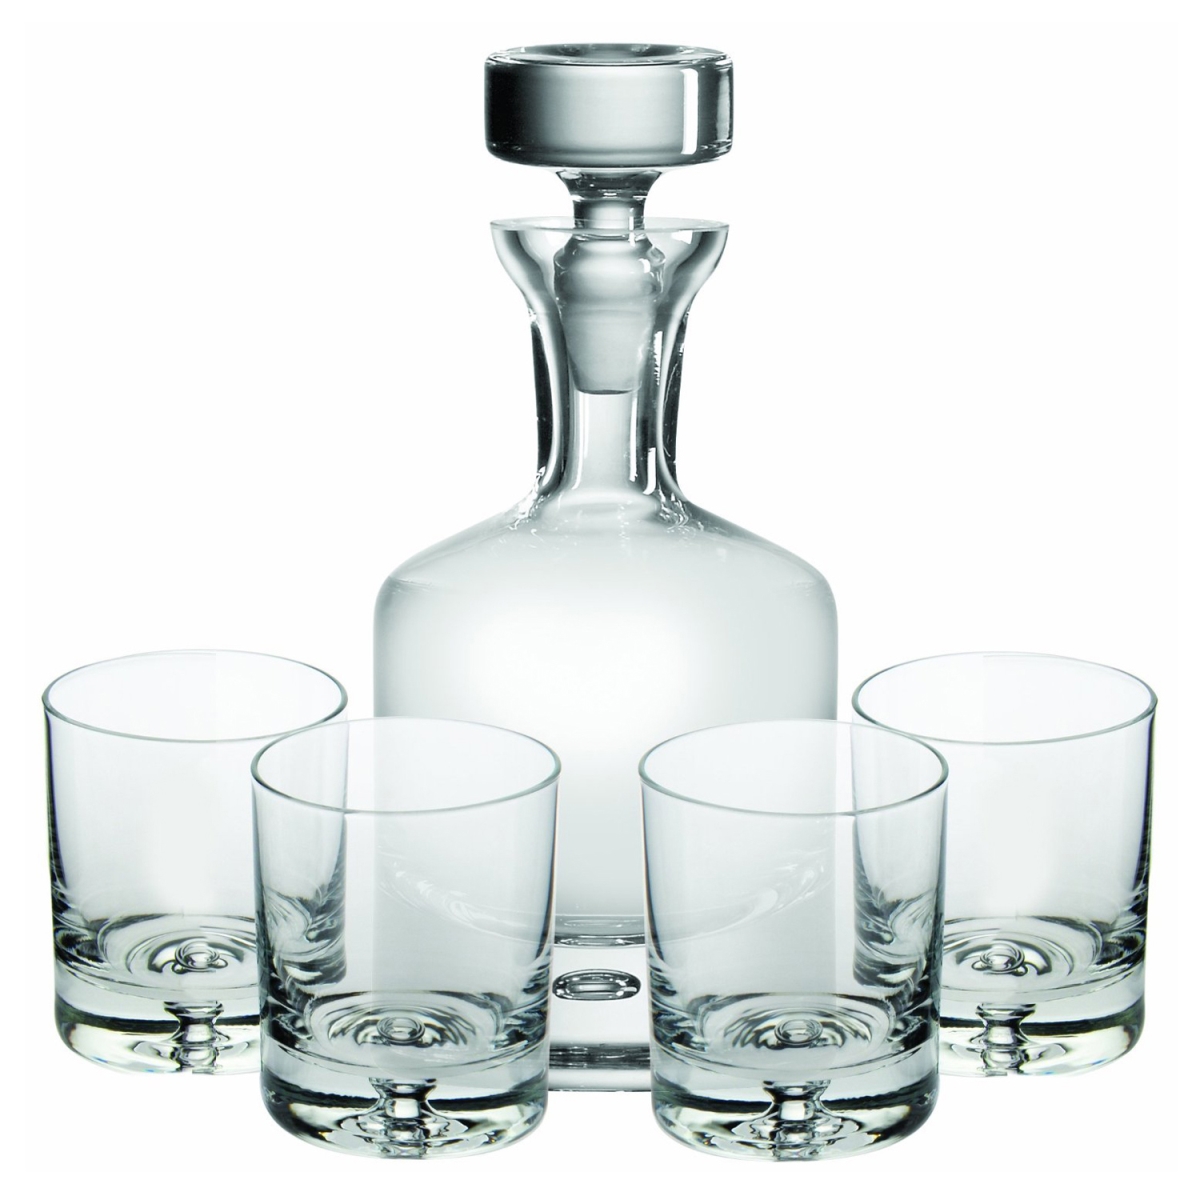 Ravenscroft W750 Crystal Taylor Double Old Fashioned Decanter Gift Set